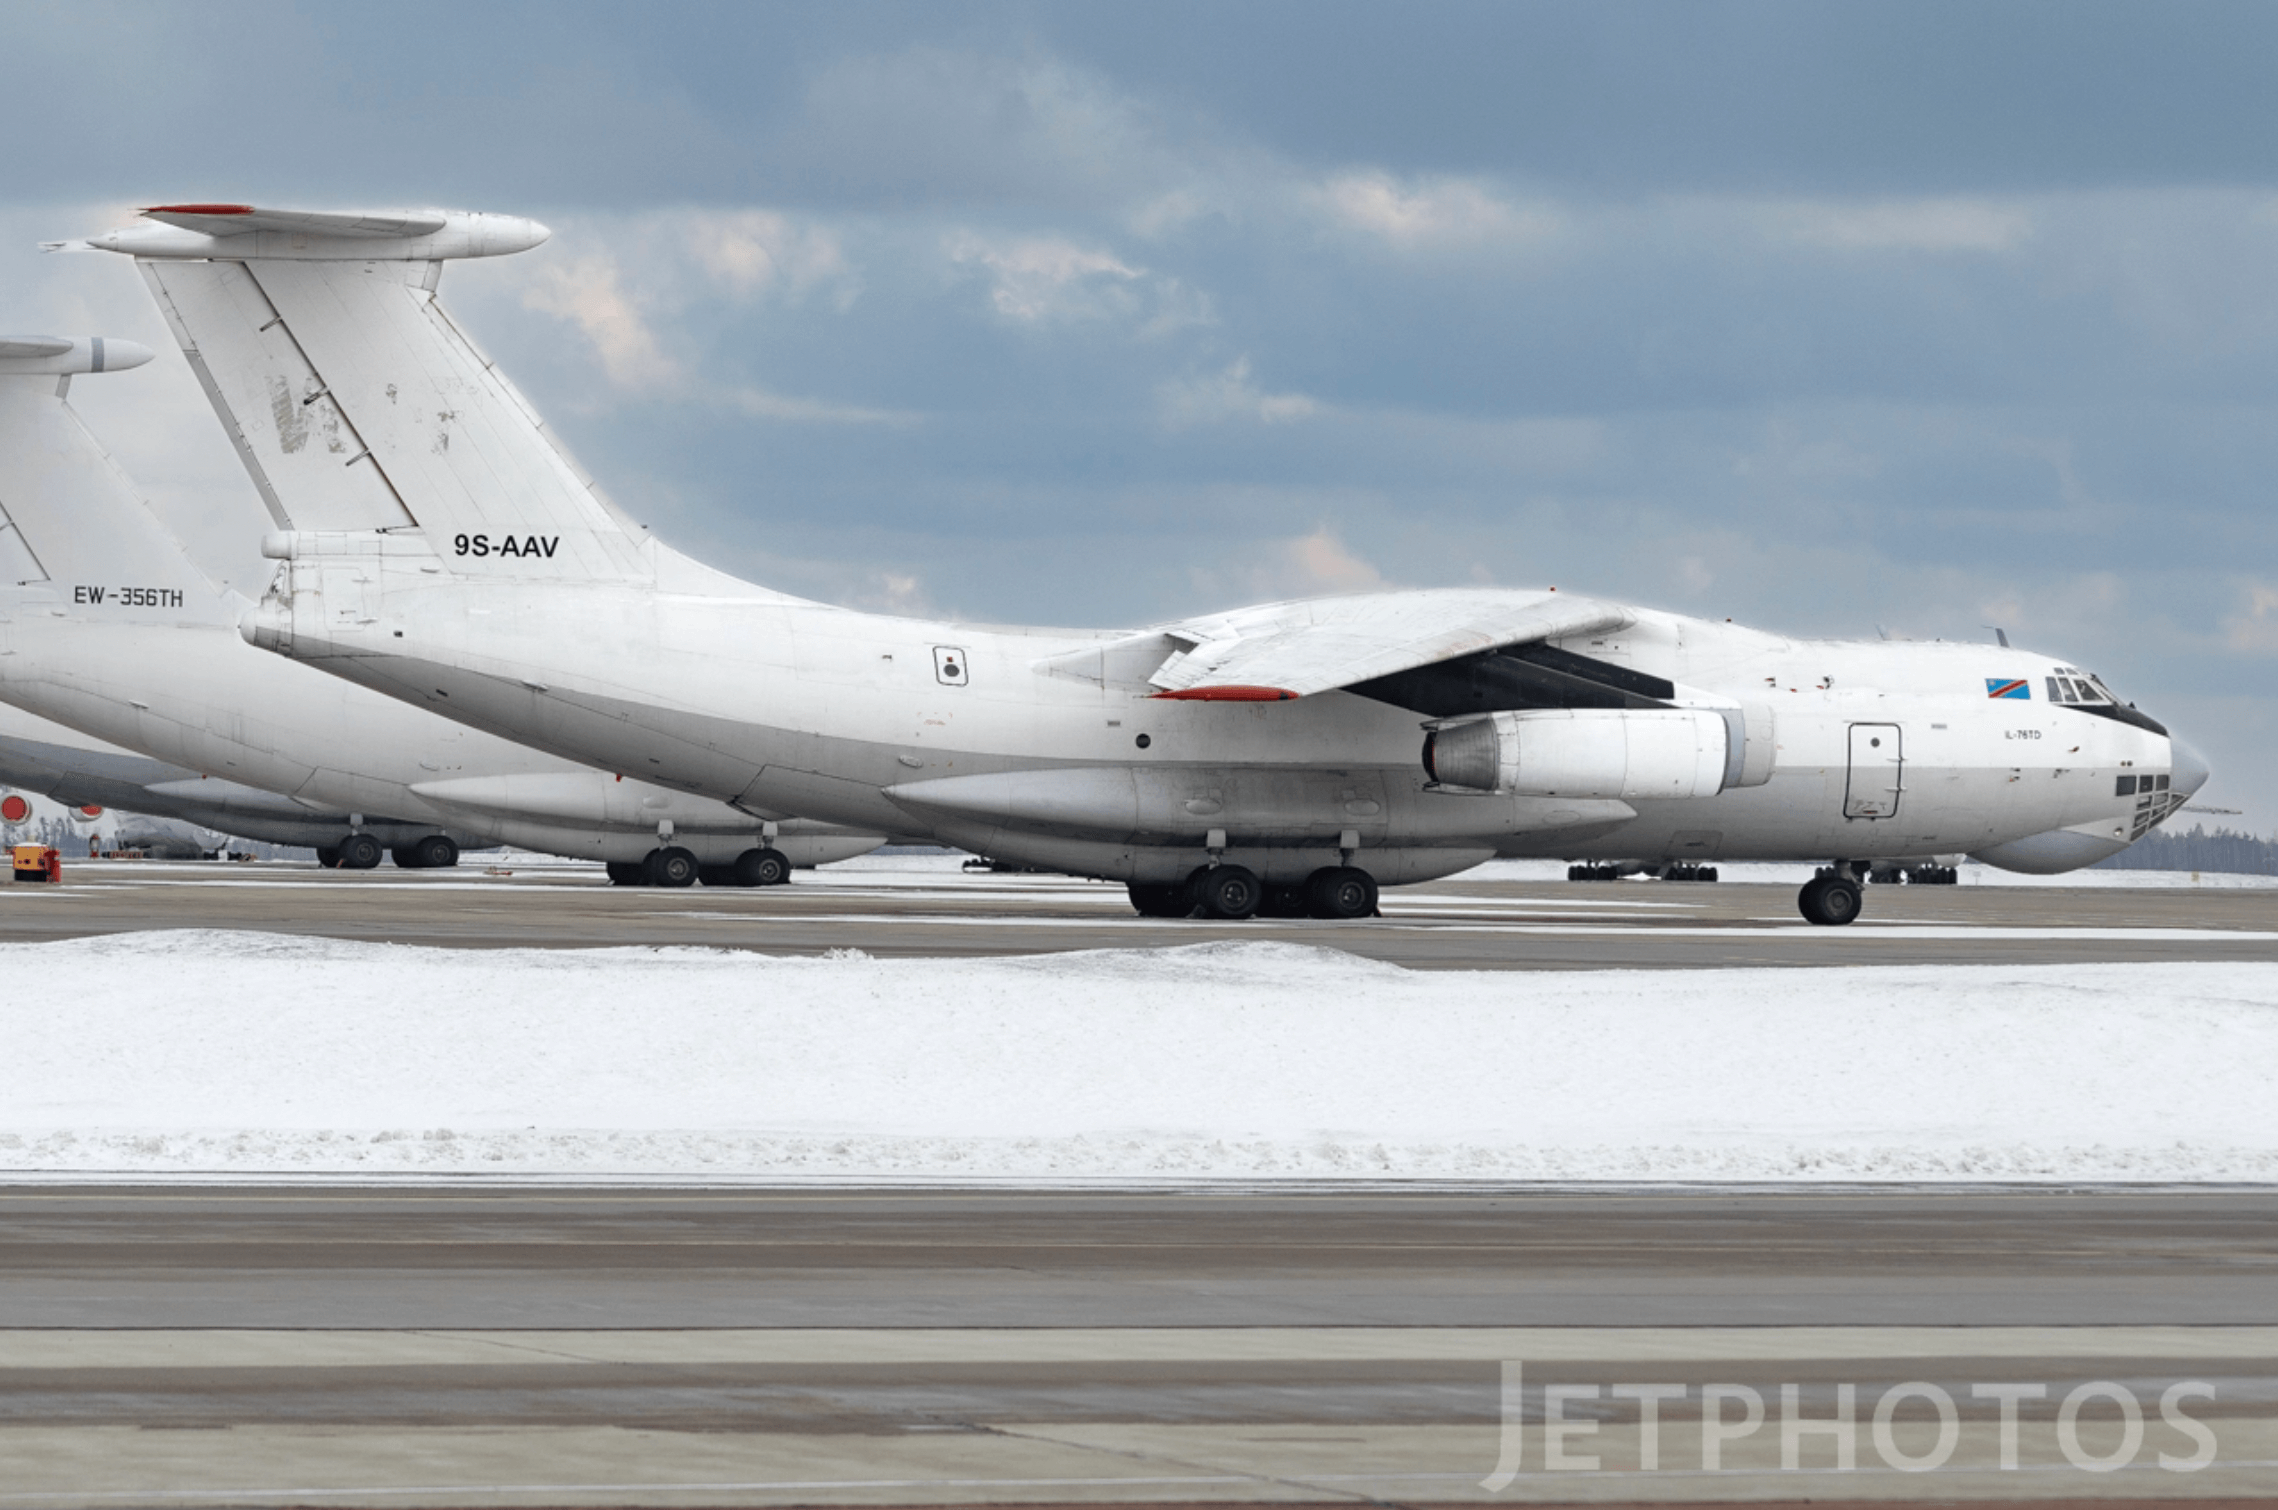 Congo bought a Belarusian Il-76 that took part in the UN Food Program